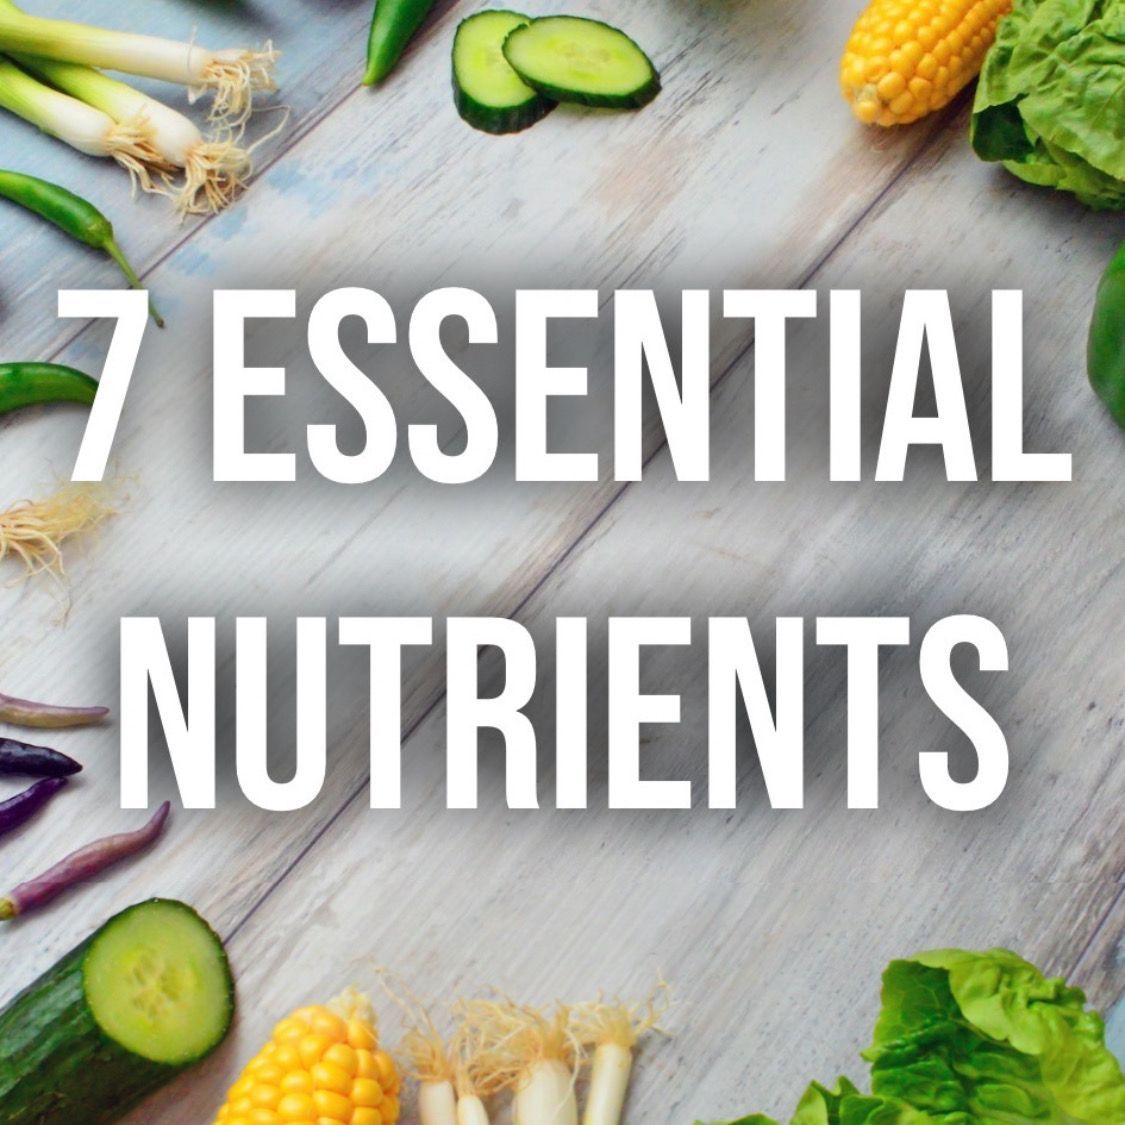 7 essential nutrients that vegetarians could be lacking in diet.